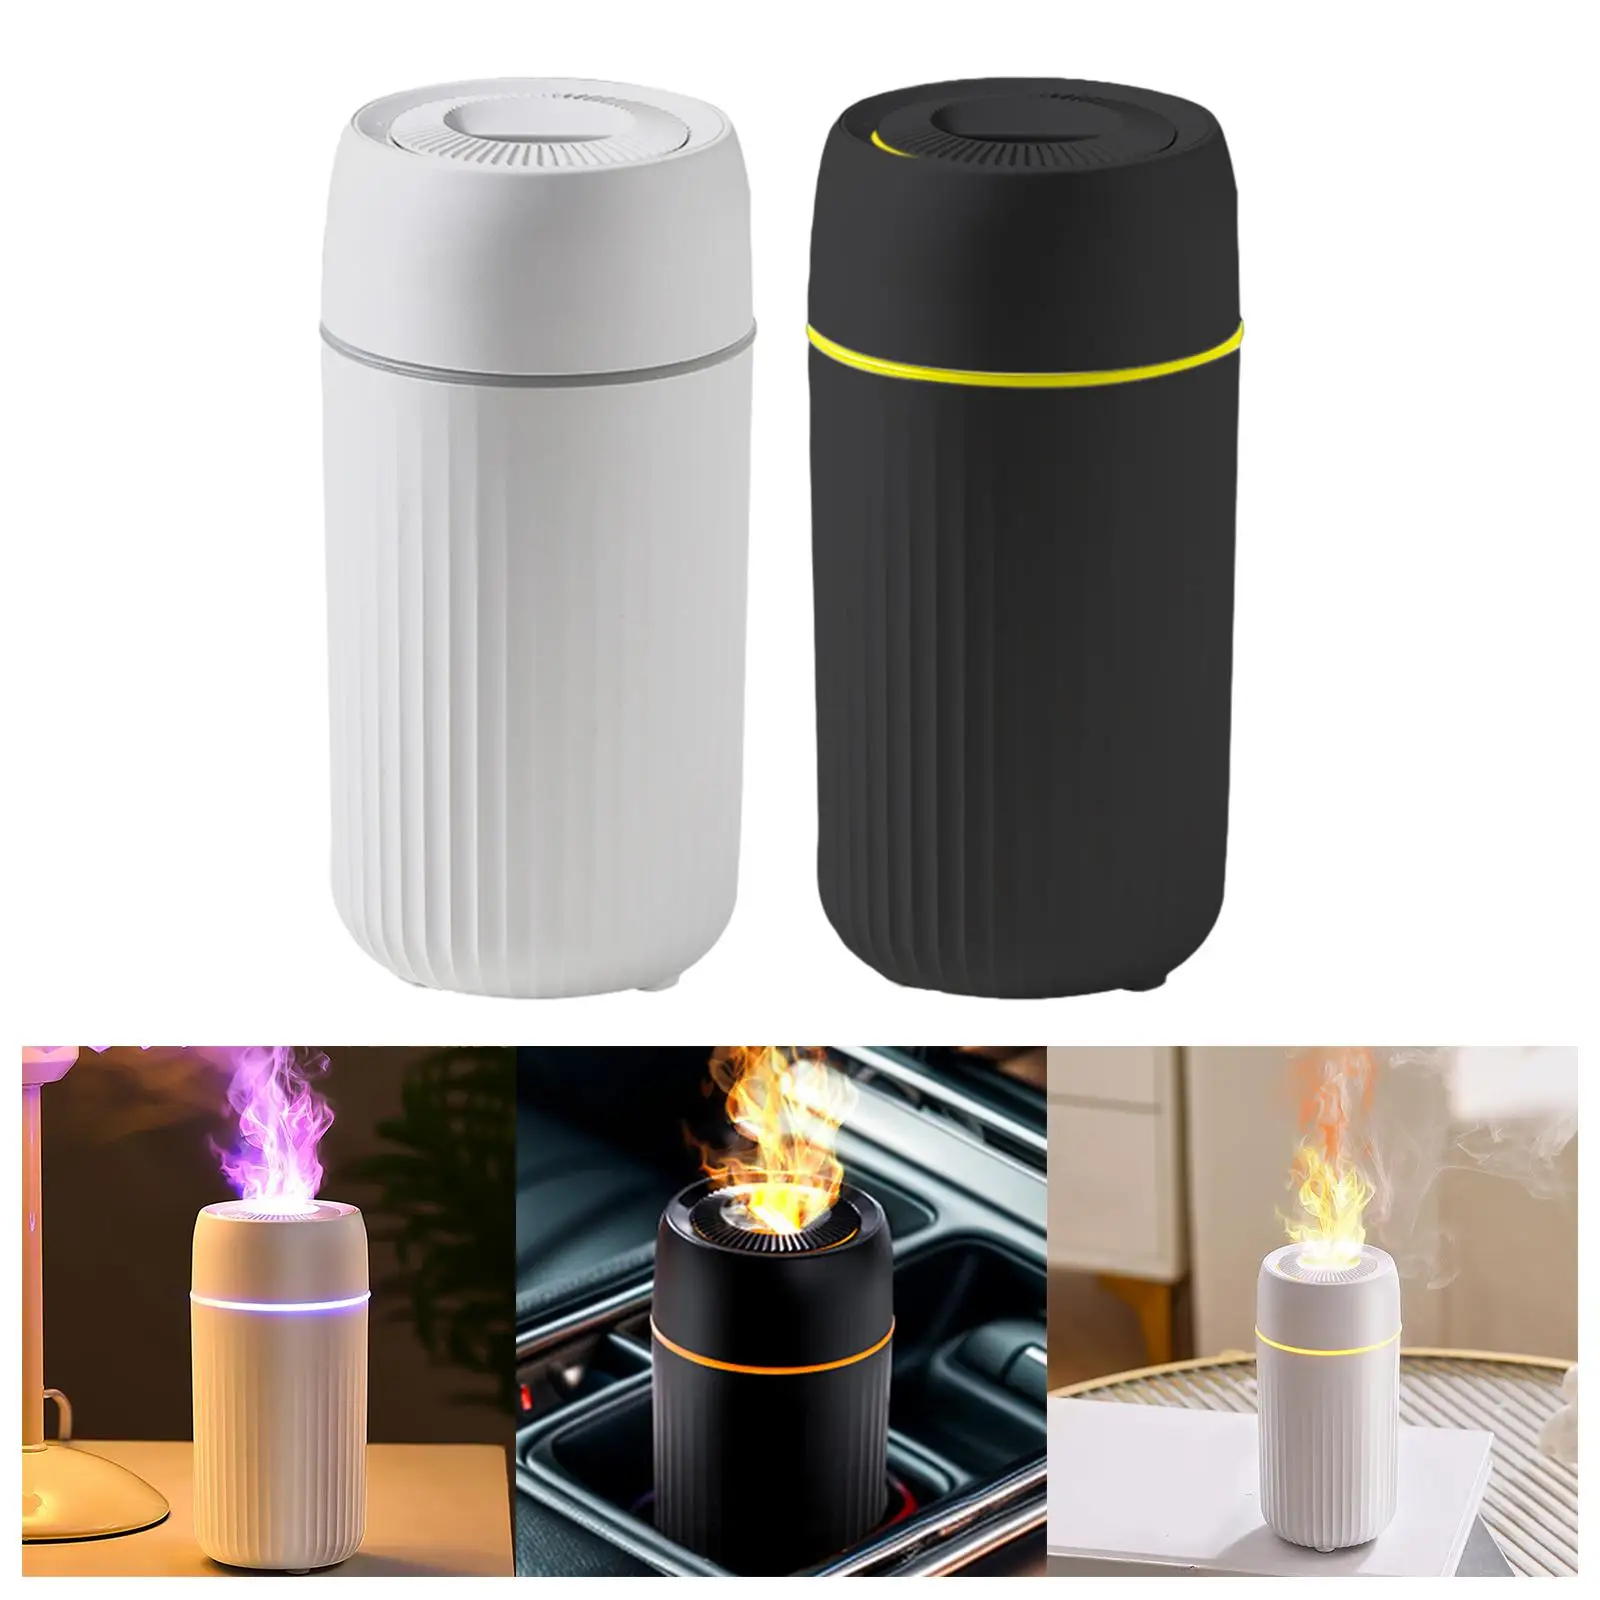 USB Aroma Diffuser Waterless Auto Off 100ml Noiseless Essential Oil Diffuser Quiet Desk Humidifier for Bedroom Car Home SPA Room